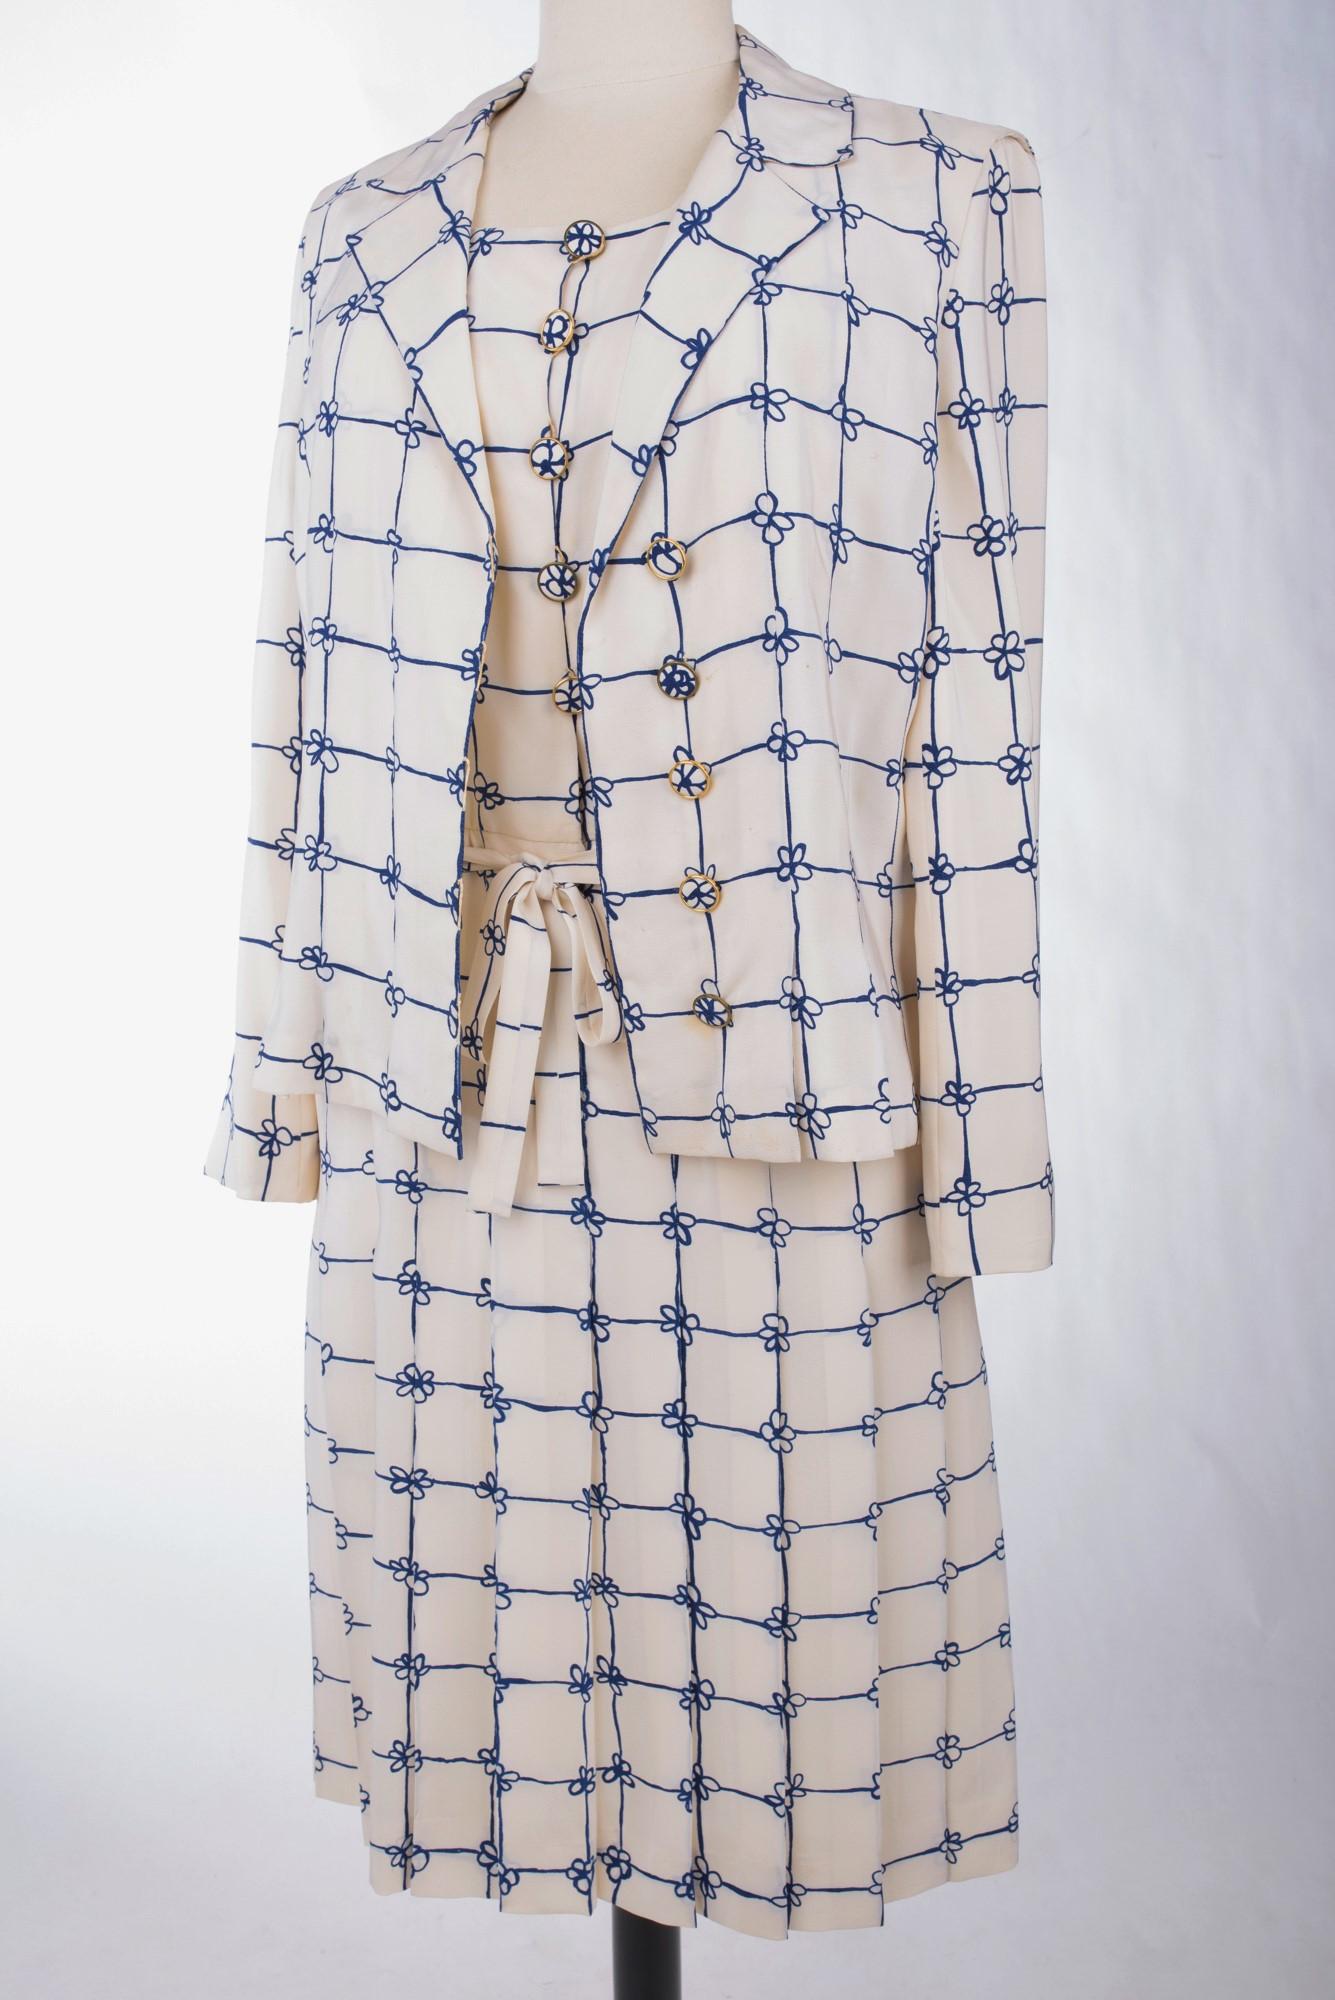 A Mademoiselle Chanel Haute Couture Printed Crepe dress Number 61476 Circa 1960 3